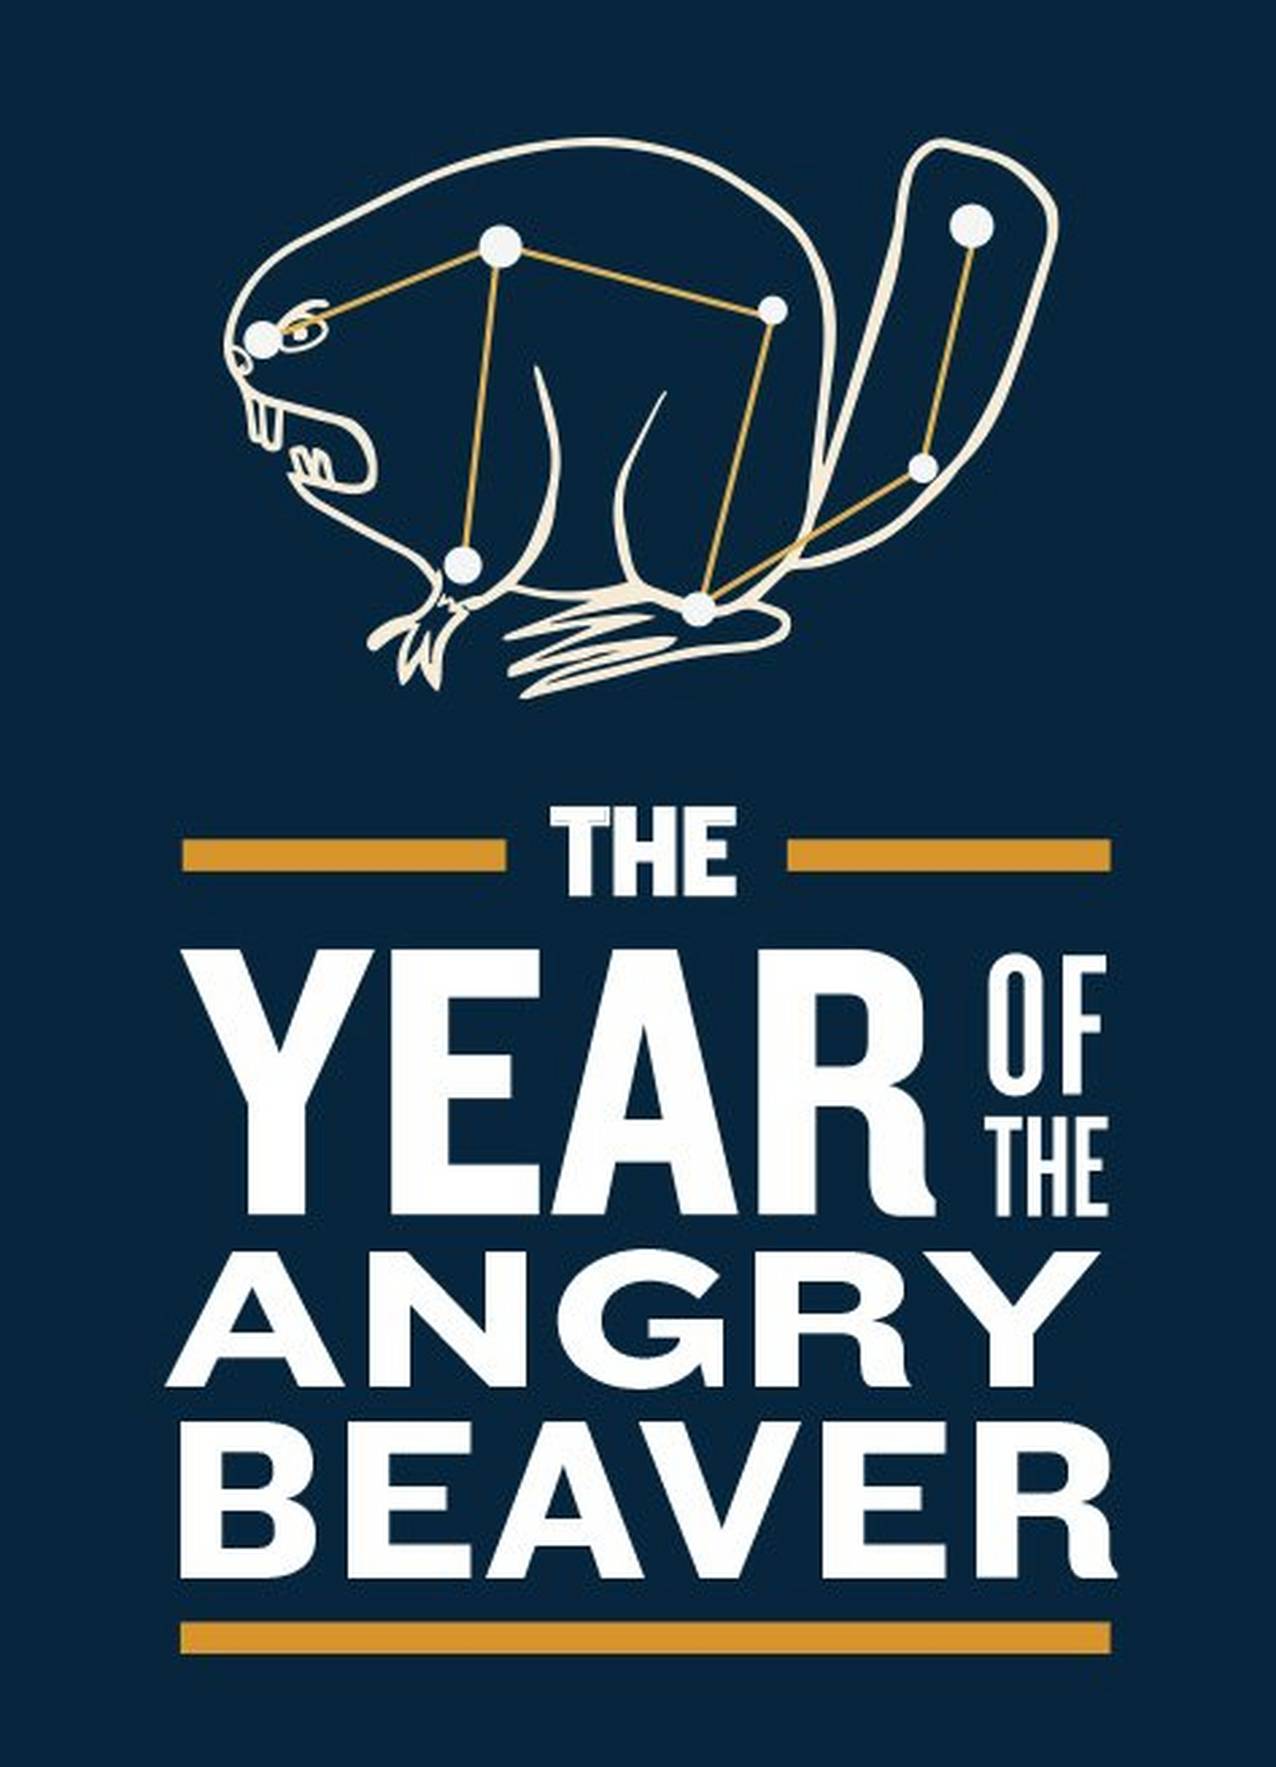 An illustration of the angry beaver as a constellation or star sign above the words: the year of the angry beaver